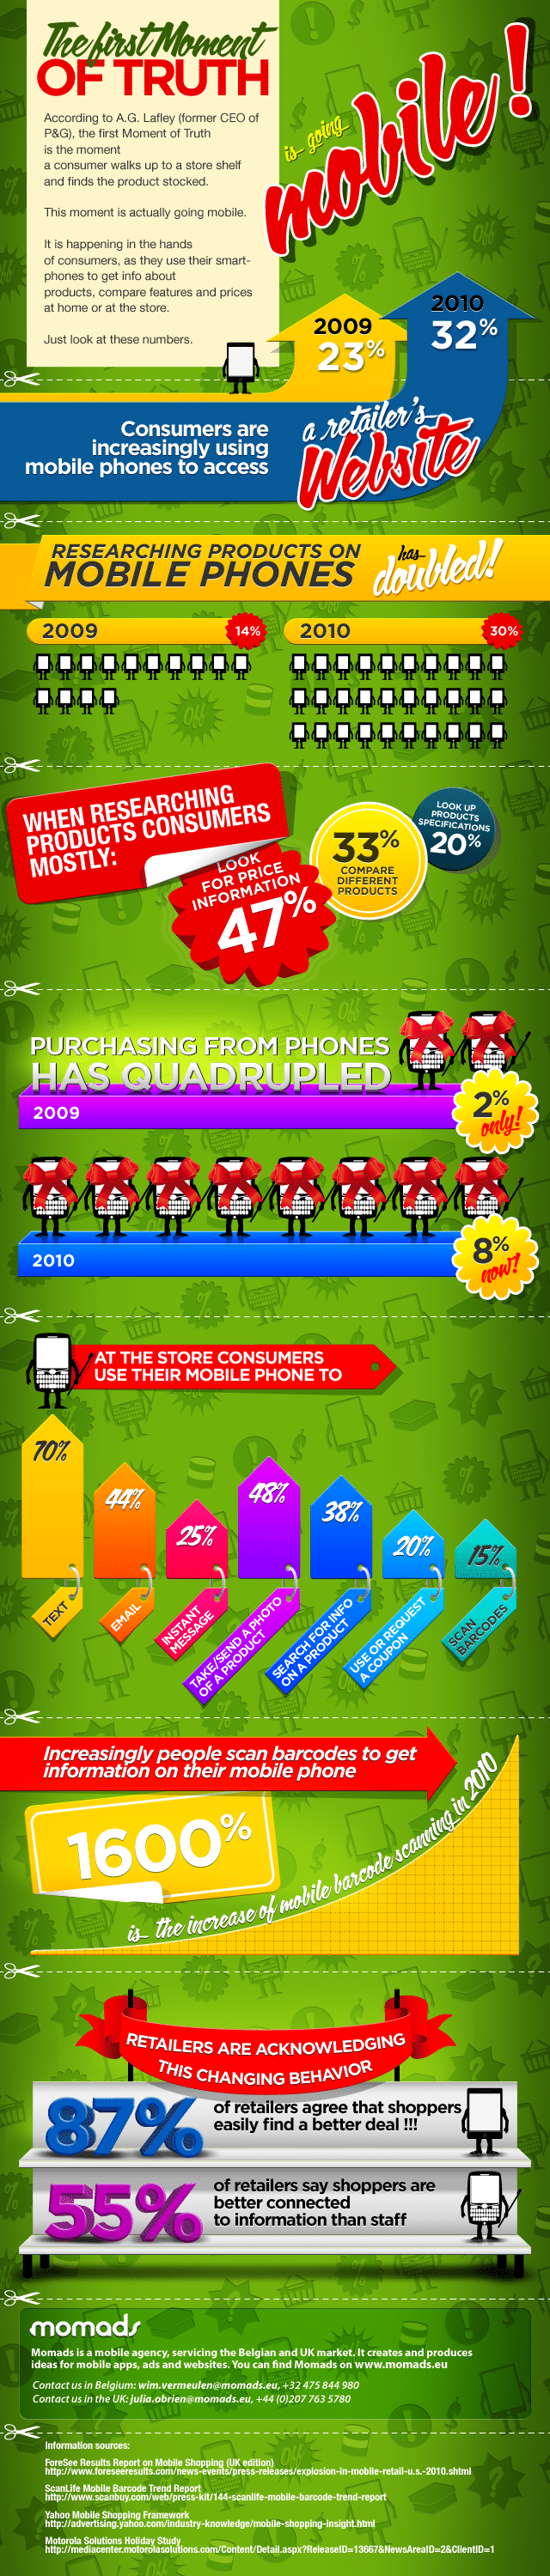 How Mobile Shopping Is Changing The World [Infographic]